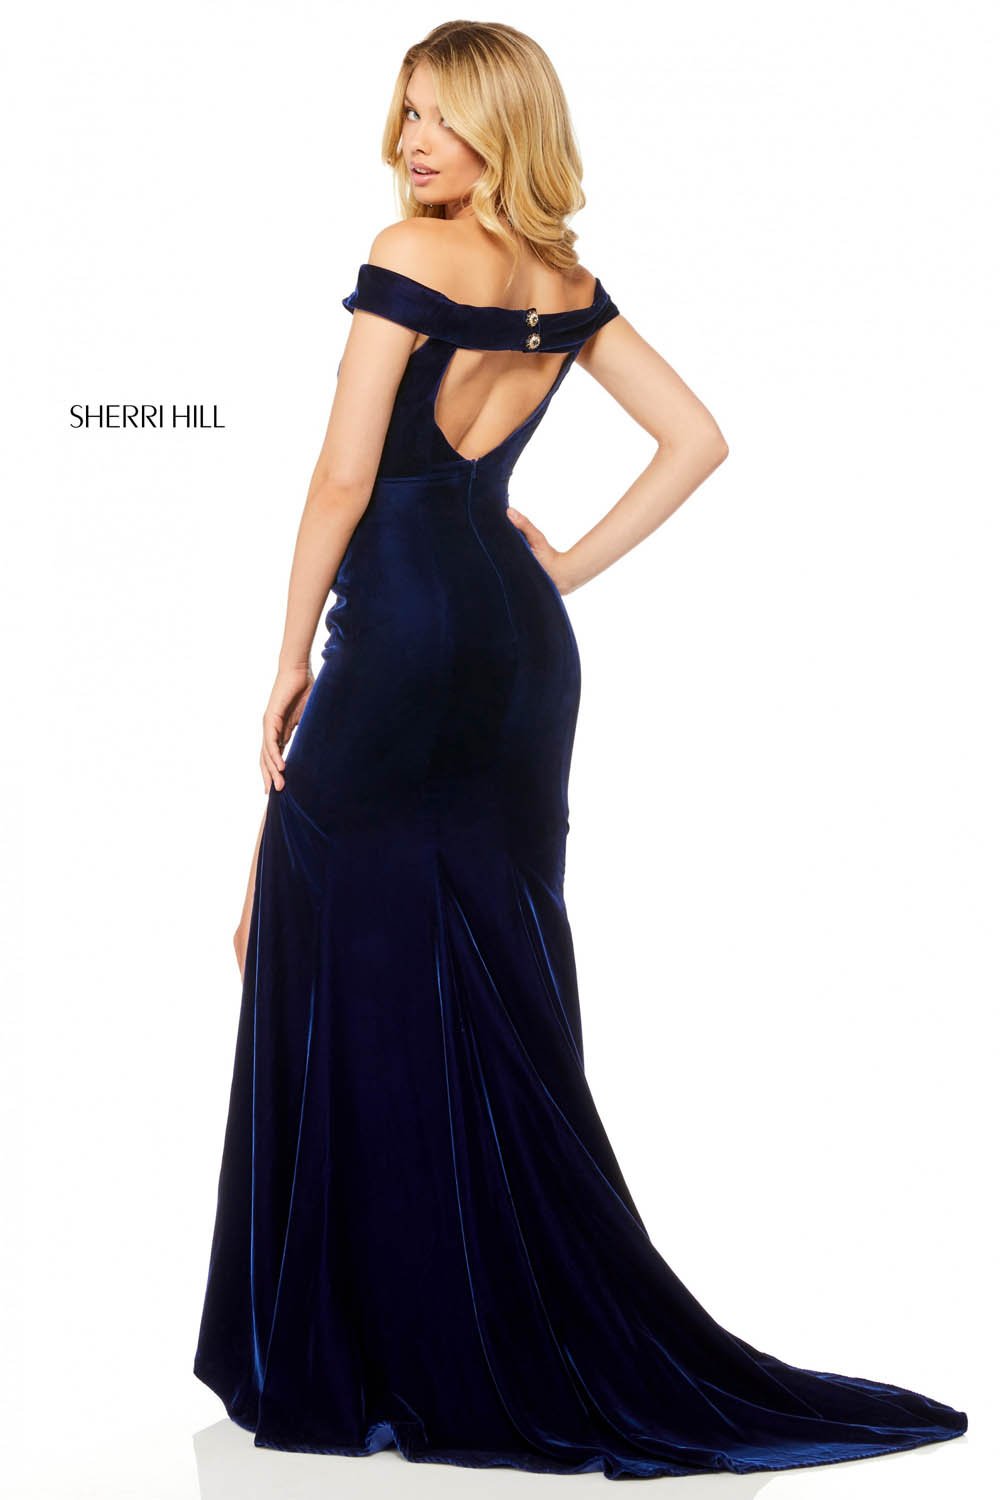 Sherri Hill 52180 dress images in these colors: Black, Navy, Burgundy.